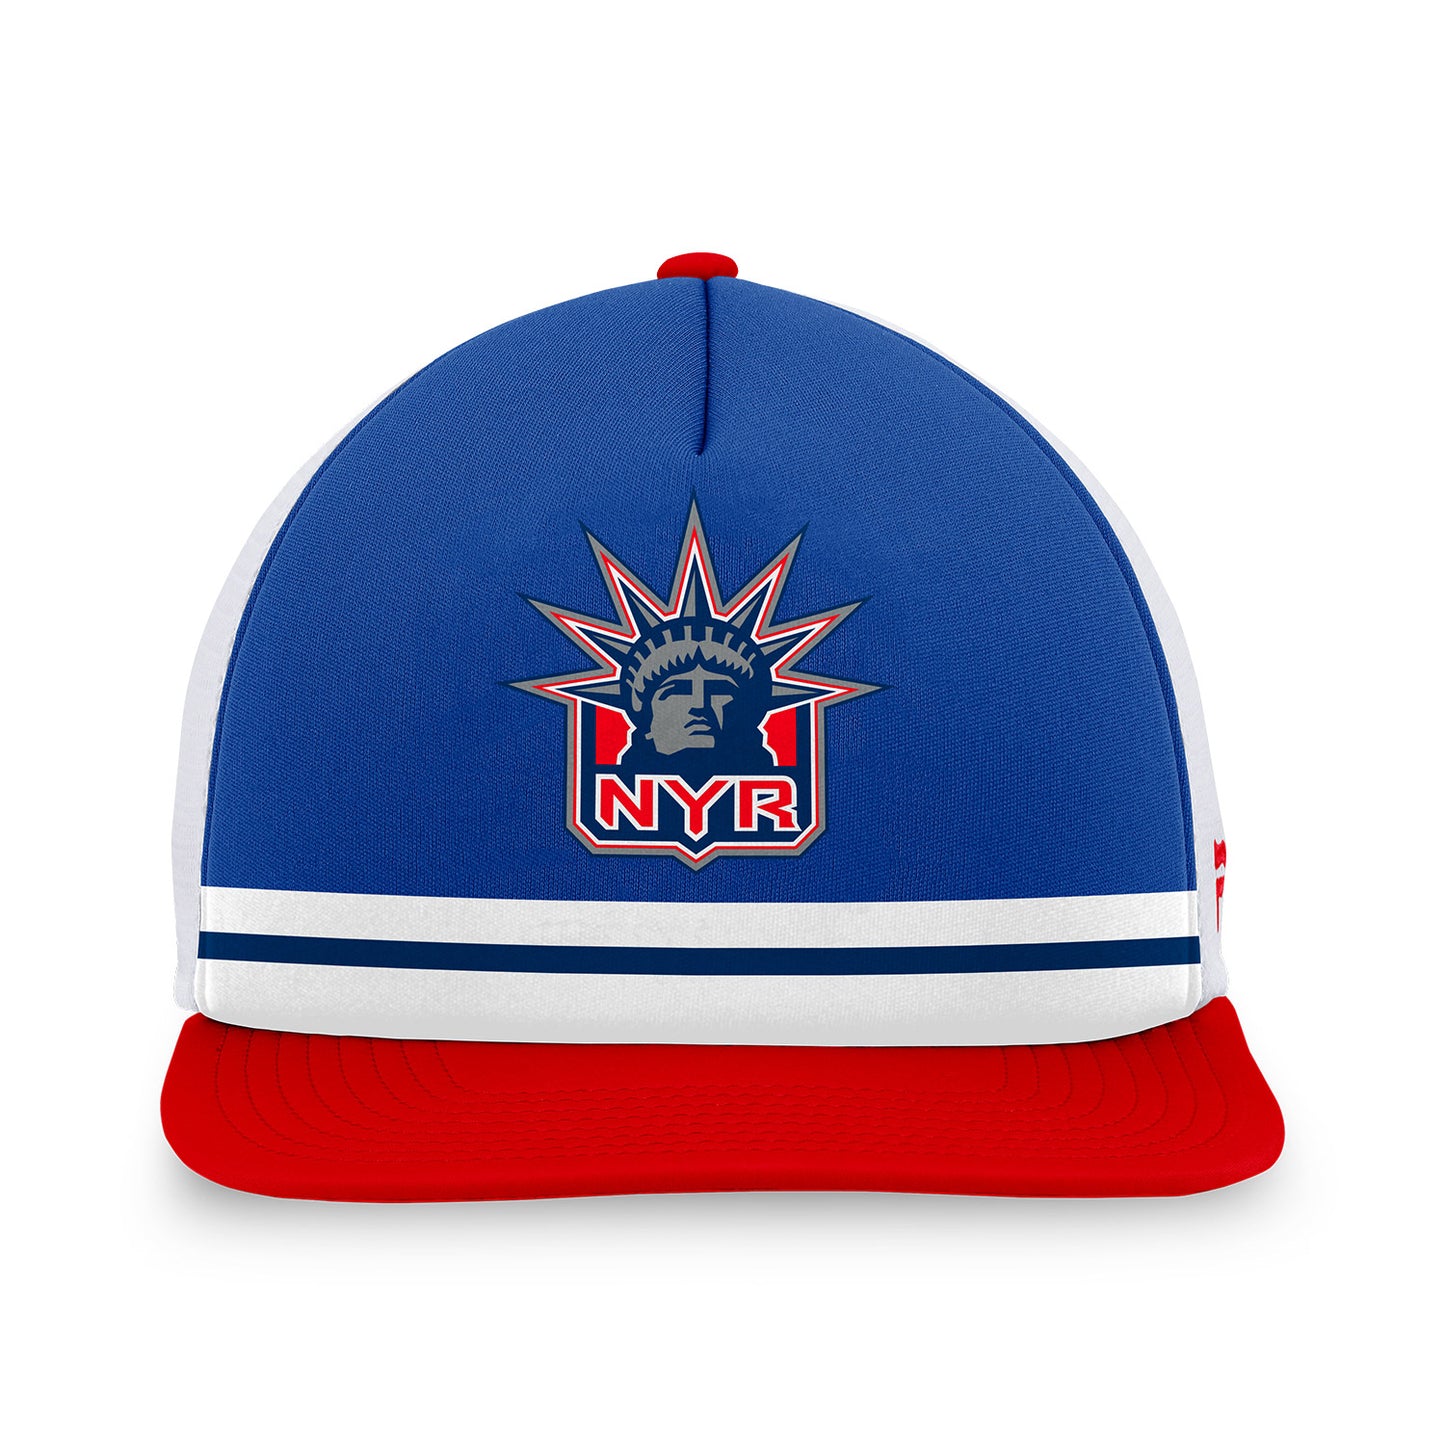 Fanatics Rangers Special Edition 2022 Foam Front Trucker Hat In Blue, Red & White - Front View